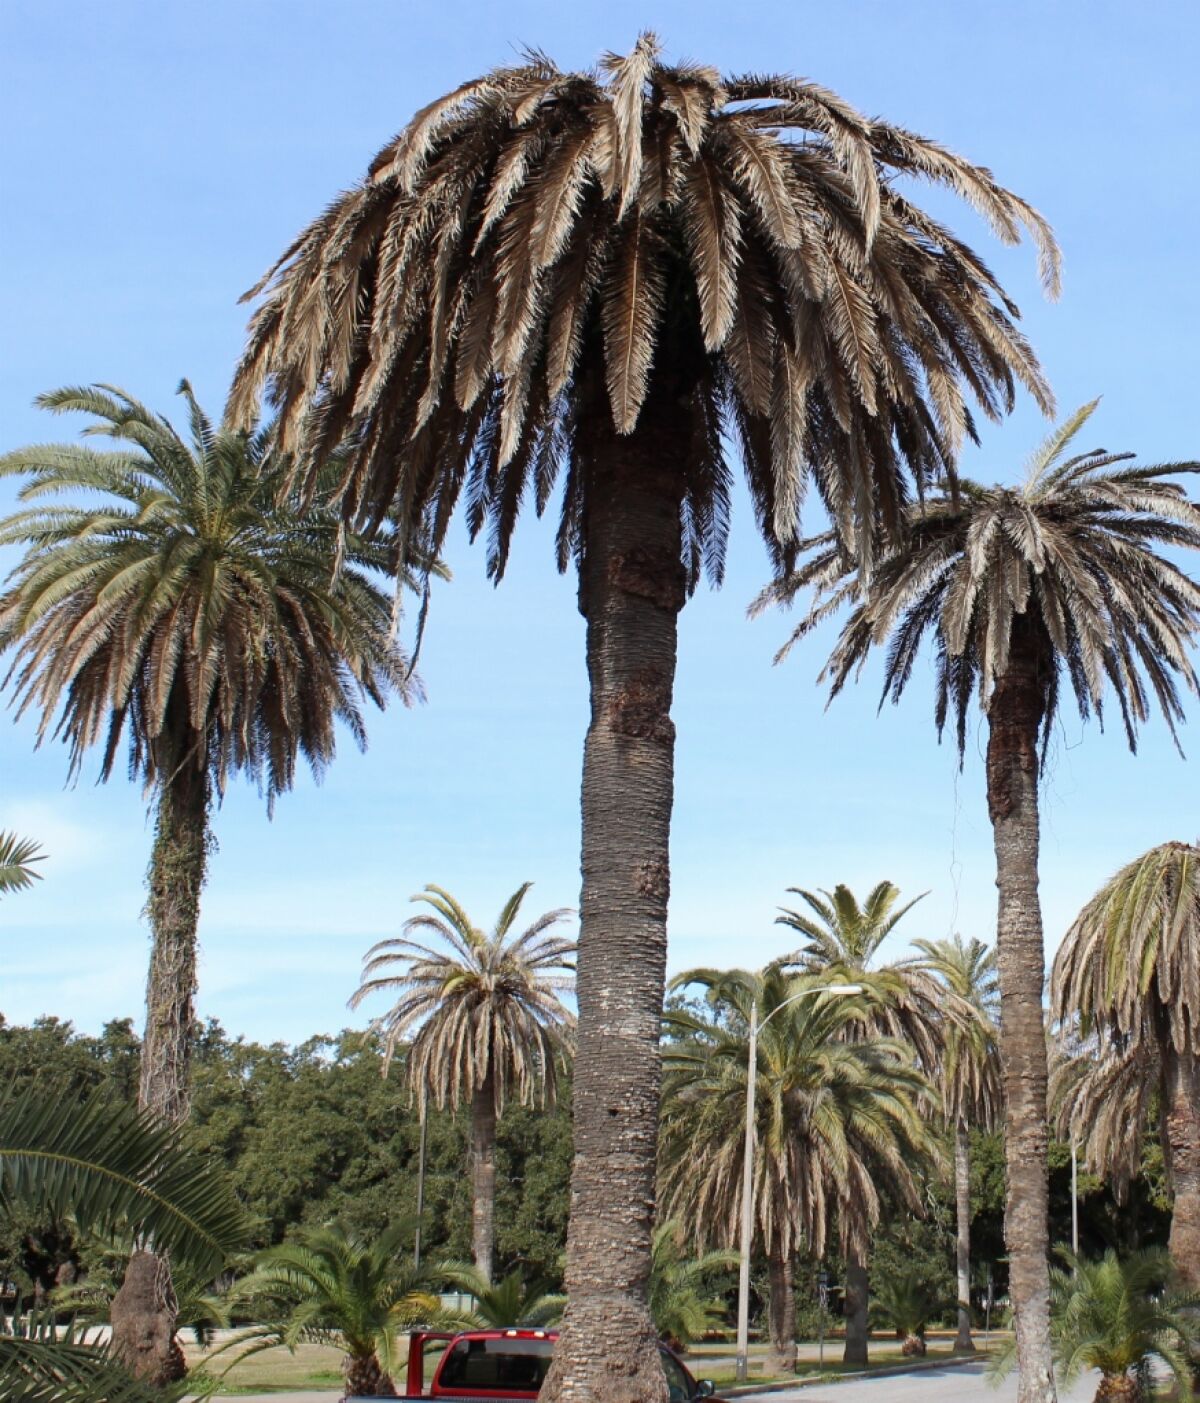 Palm trees show signs of infestation in Point Loma.